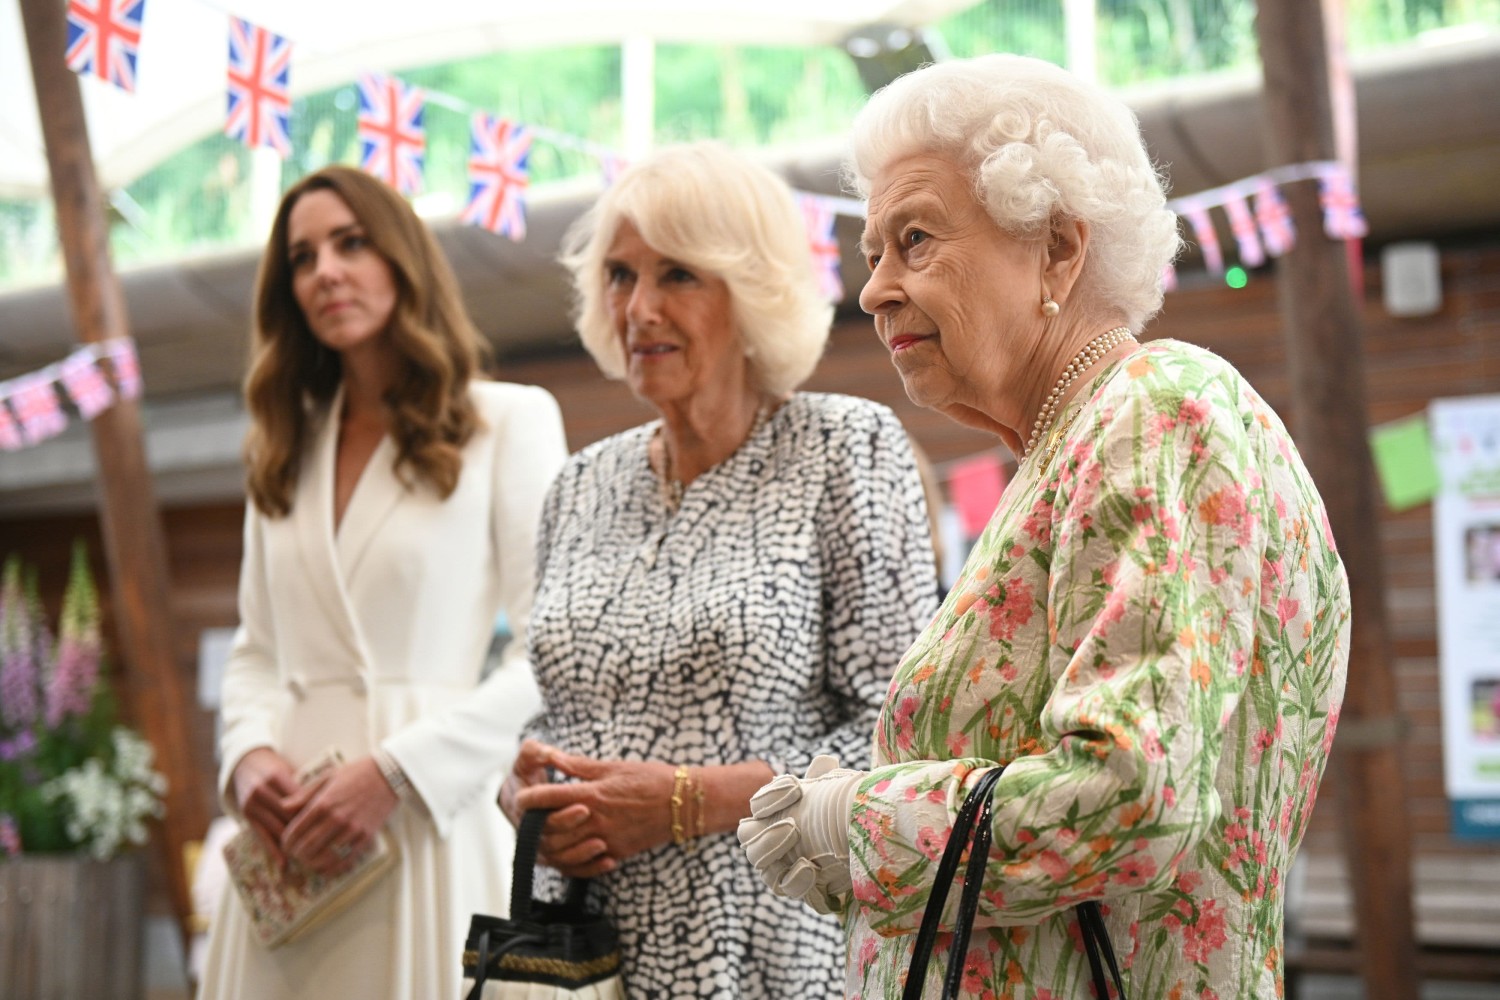 Britain’s Queen Elizabeth, Britain’s Camilla, Duchess of Cornwall and Britain’s Catherine, Duchess of Cambridge, attend an event on the sidelines of the G7 summit, at the Eden Project in Cornwall, Britain June 11, 2021. Oli Scarf | Reuters